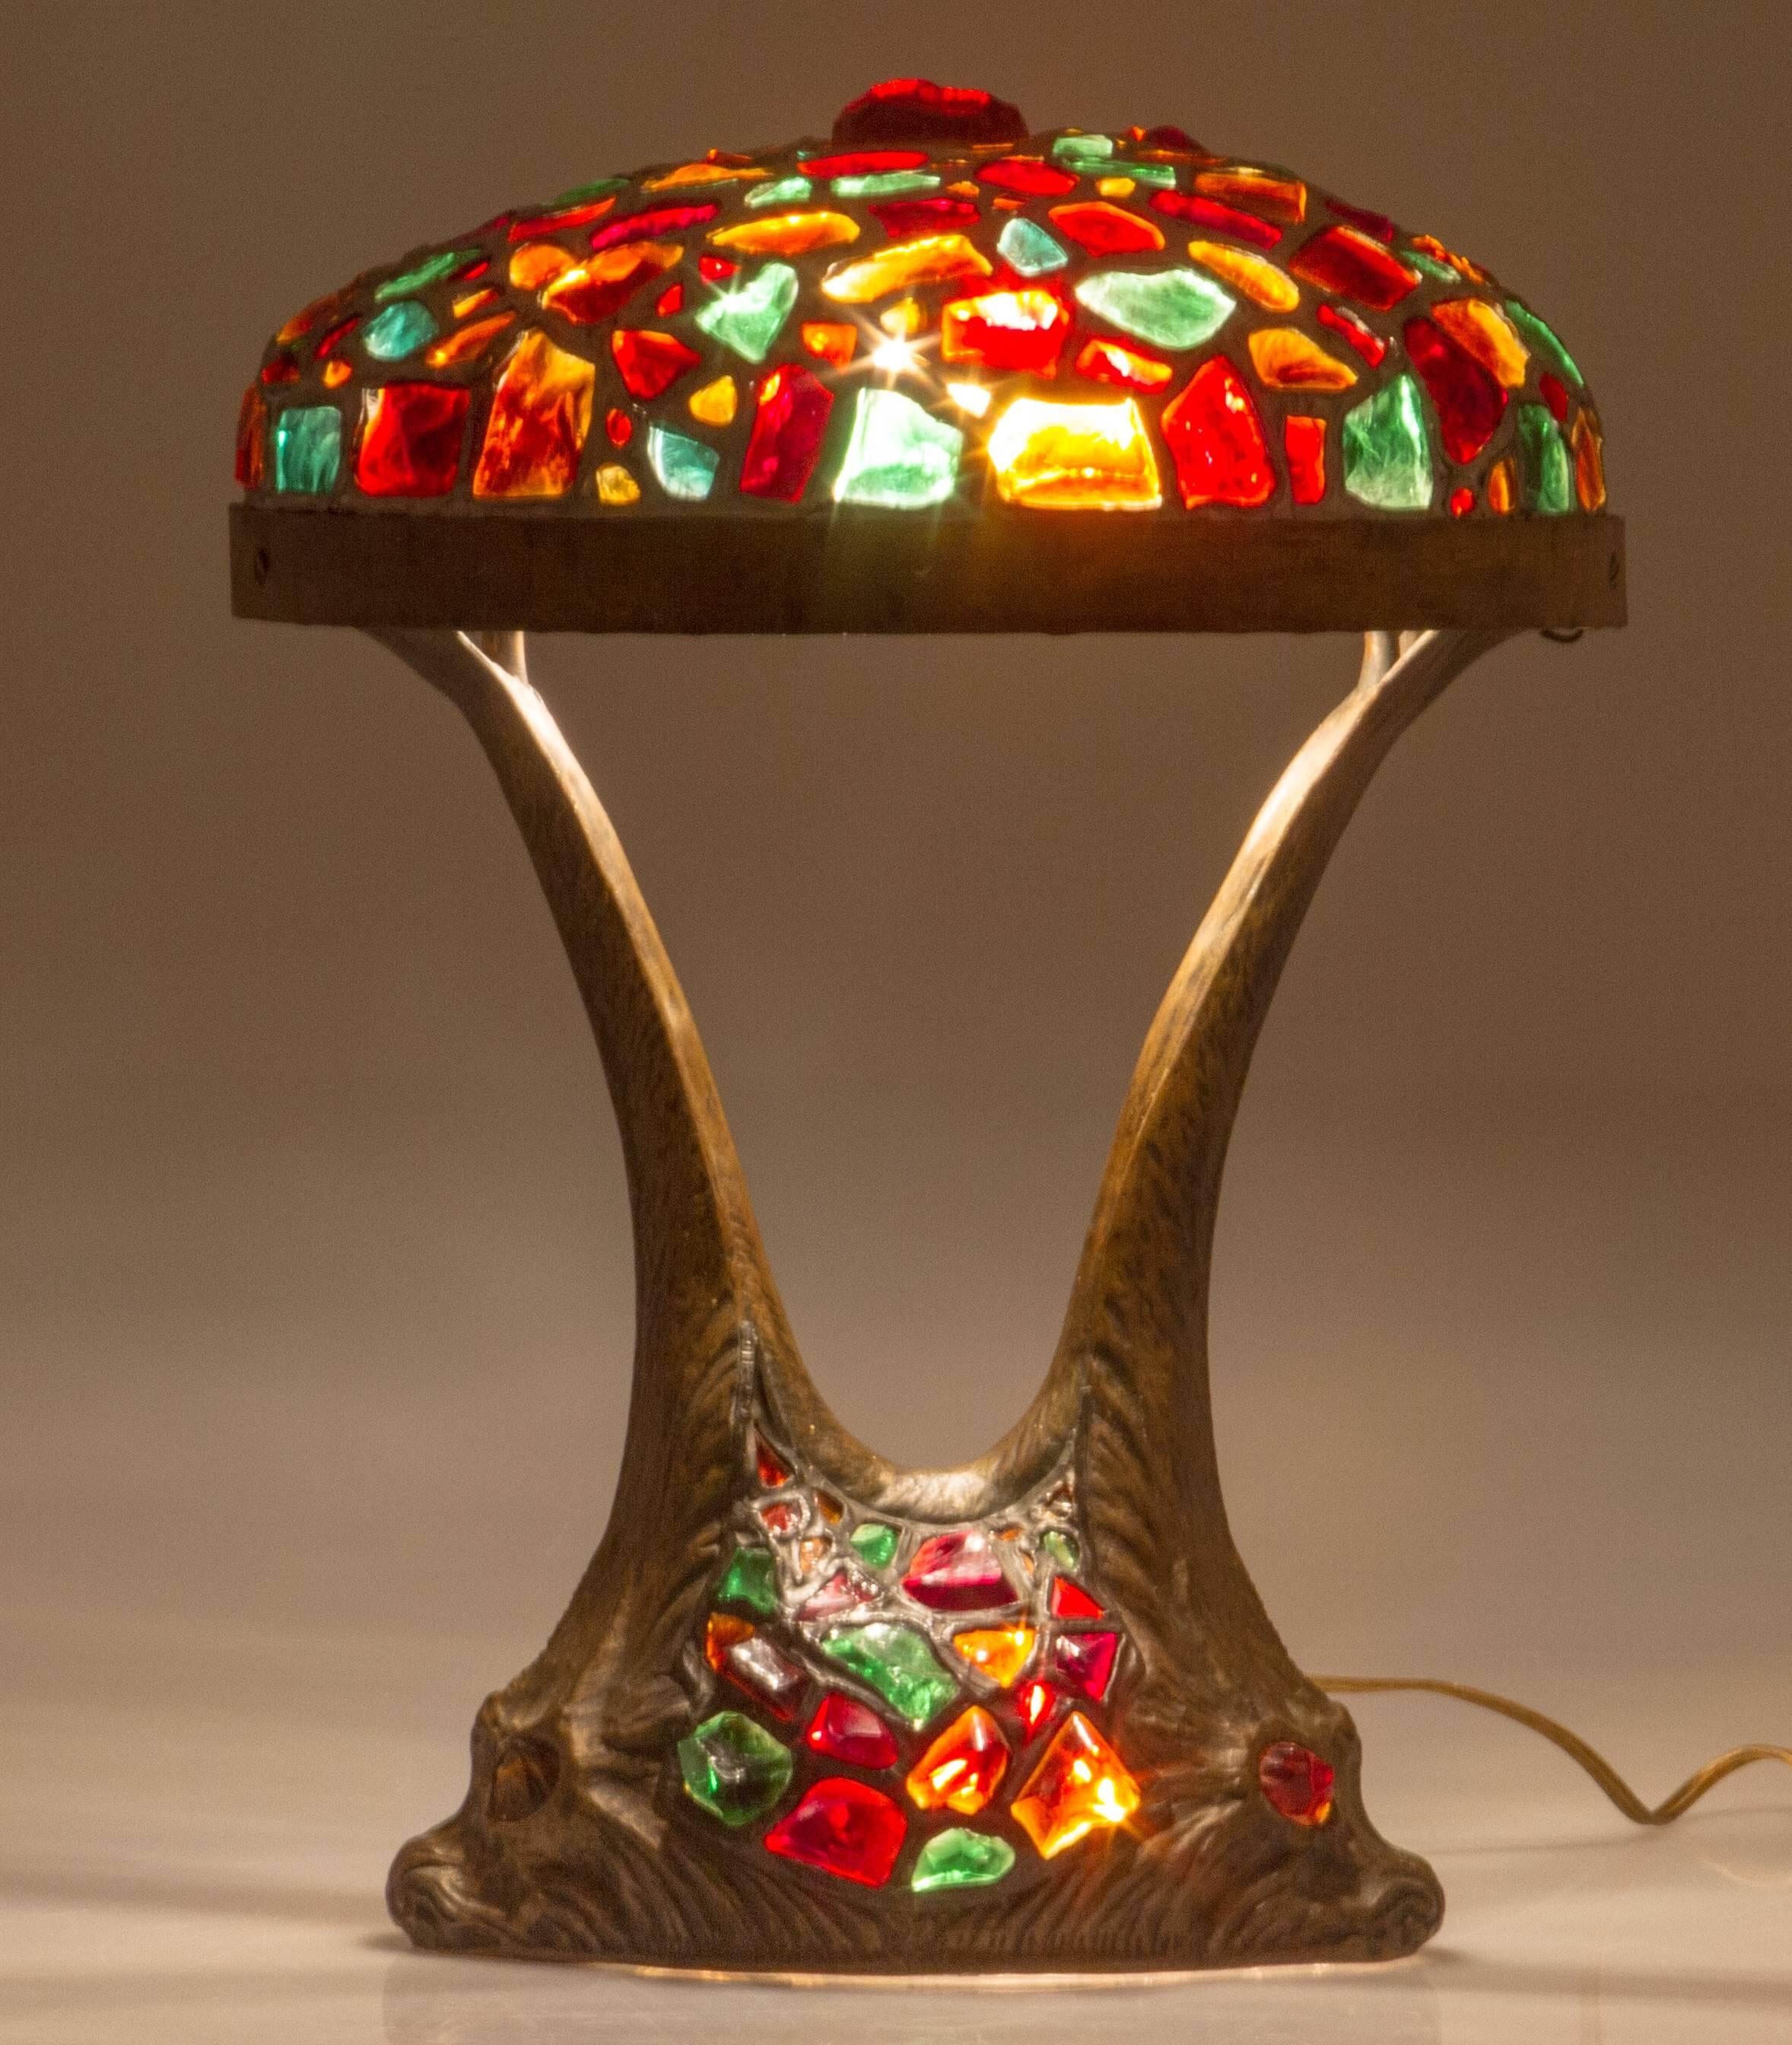 Lighting from both the base as well as the shade, this is an unusual and beautiful lamp. Highlighting the chunk glass elements two glass eyed dolphins support the shade.